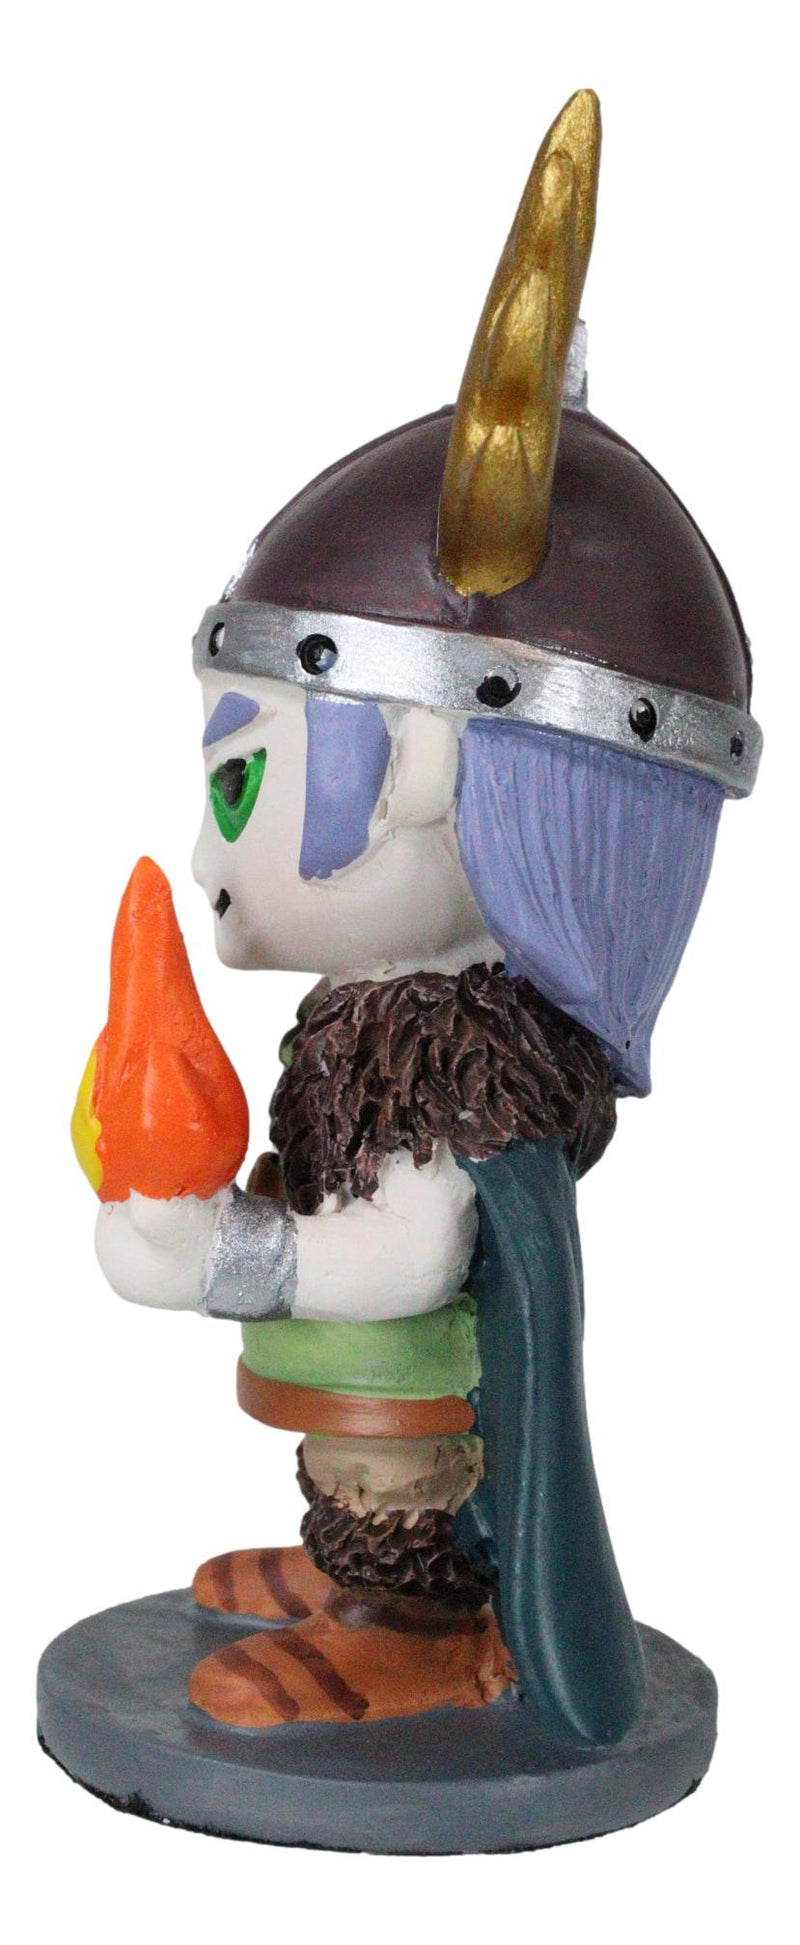 Ebros Norsies Small Figurine 4.25 Inch Tall Norse Viking Collectible (Loki)